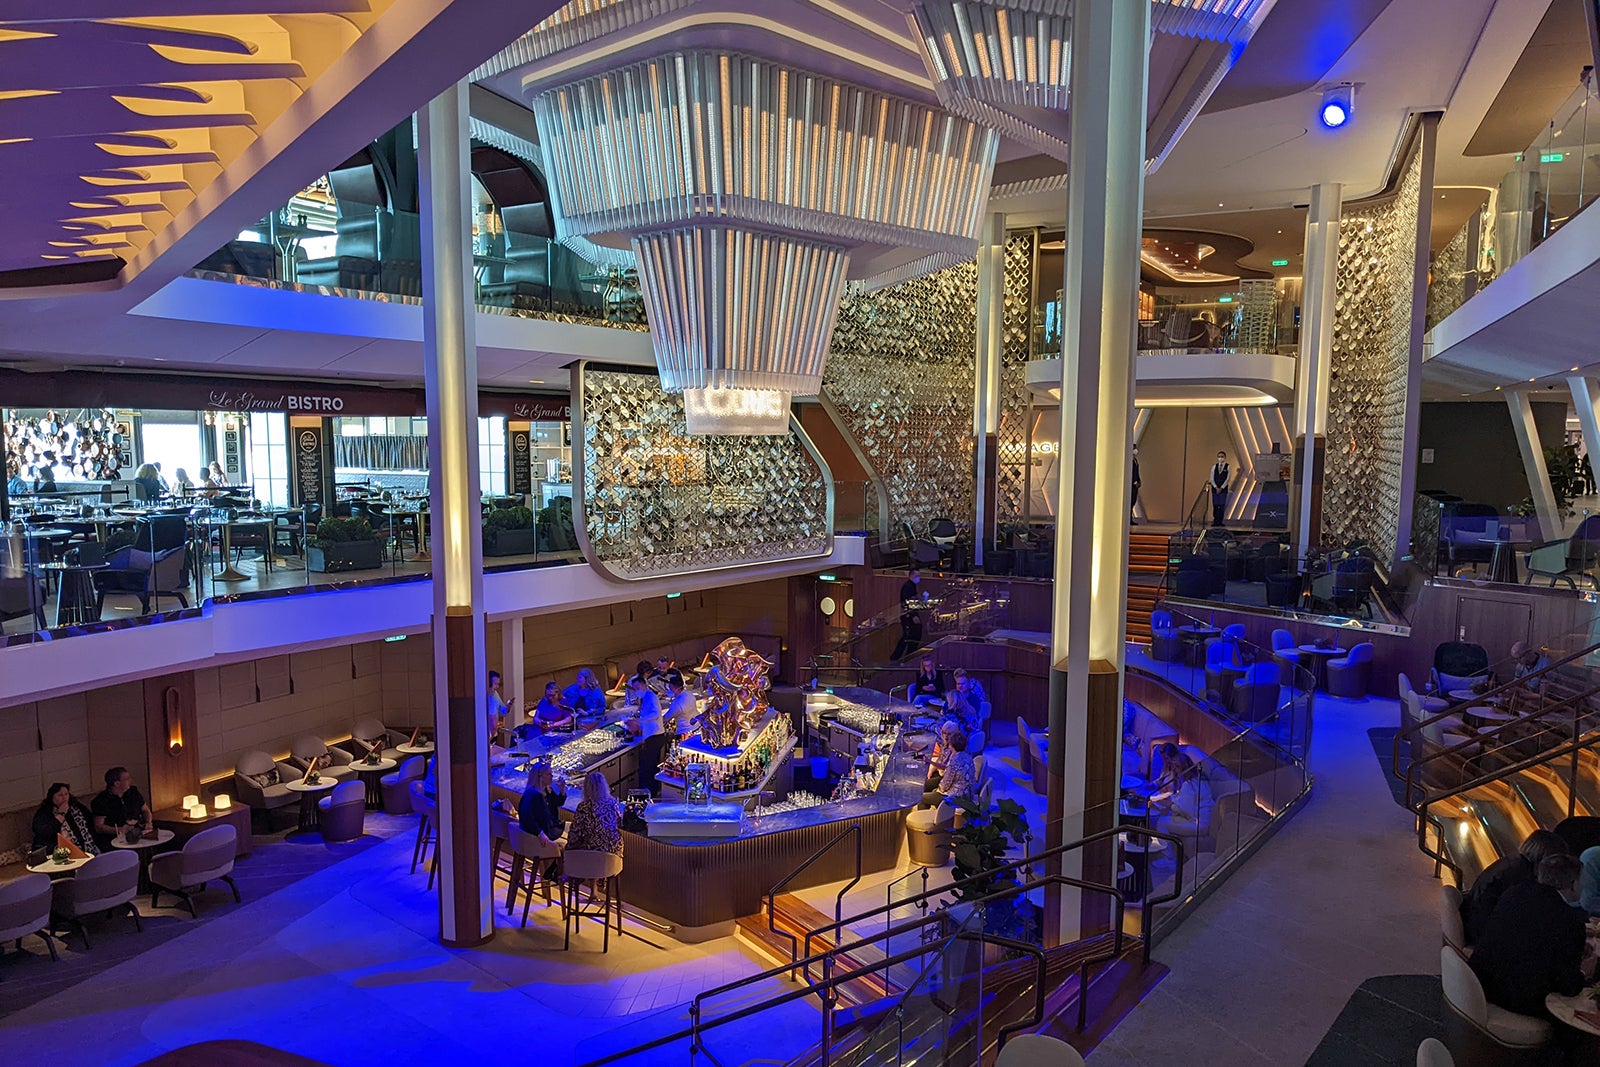 A bar in the middle of a cruise ship atrium